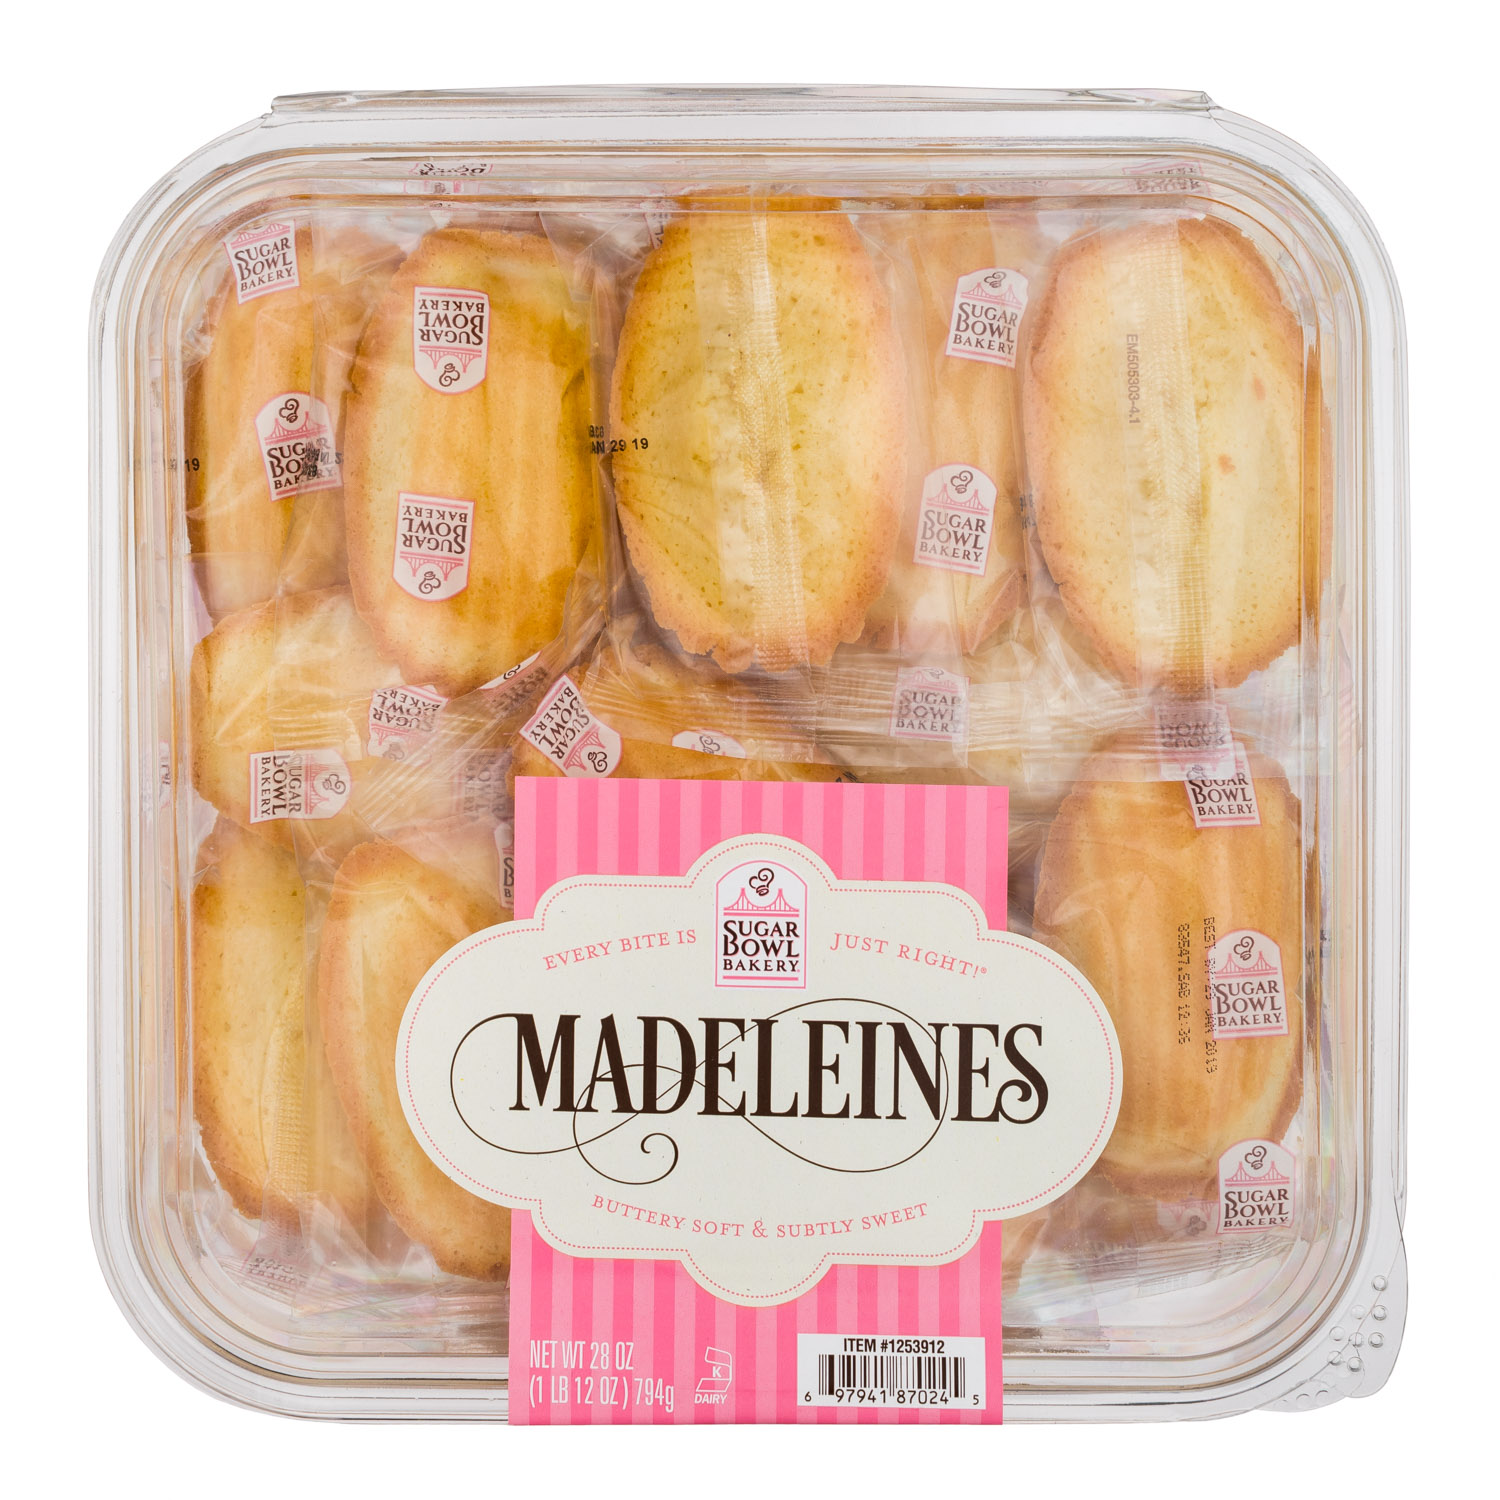 How to make Madeleines (Philippe Conticini's recipe) - Wheel of Baking